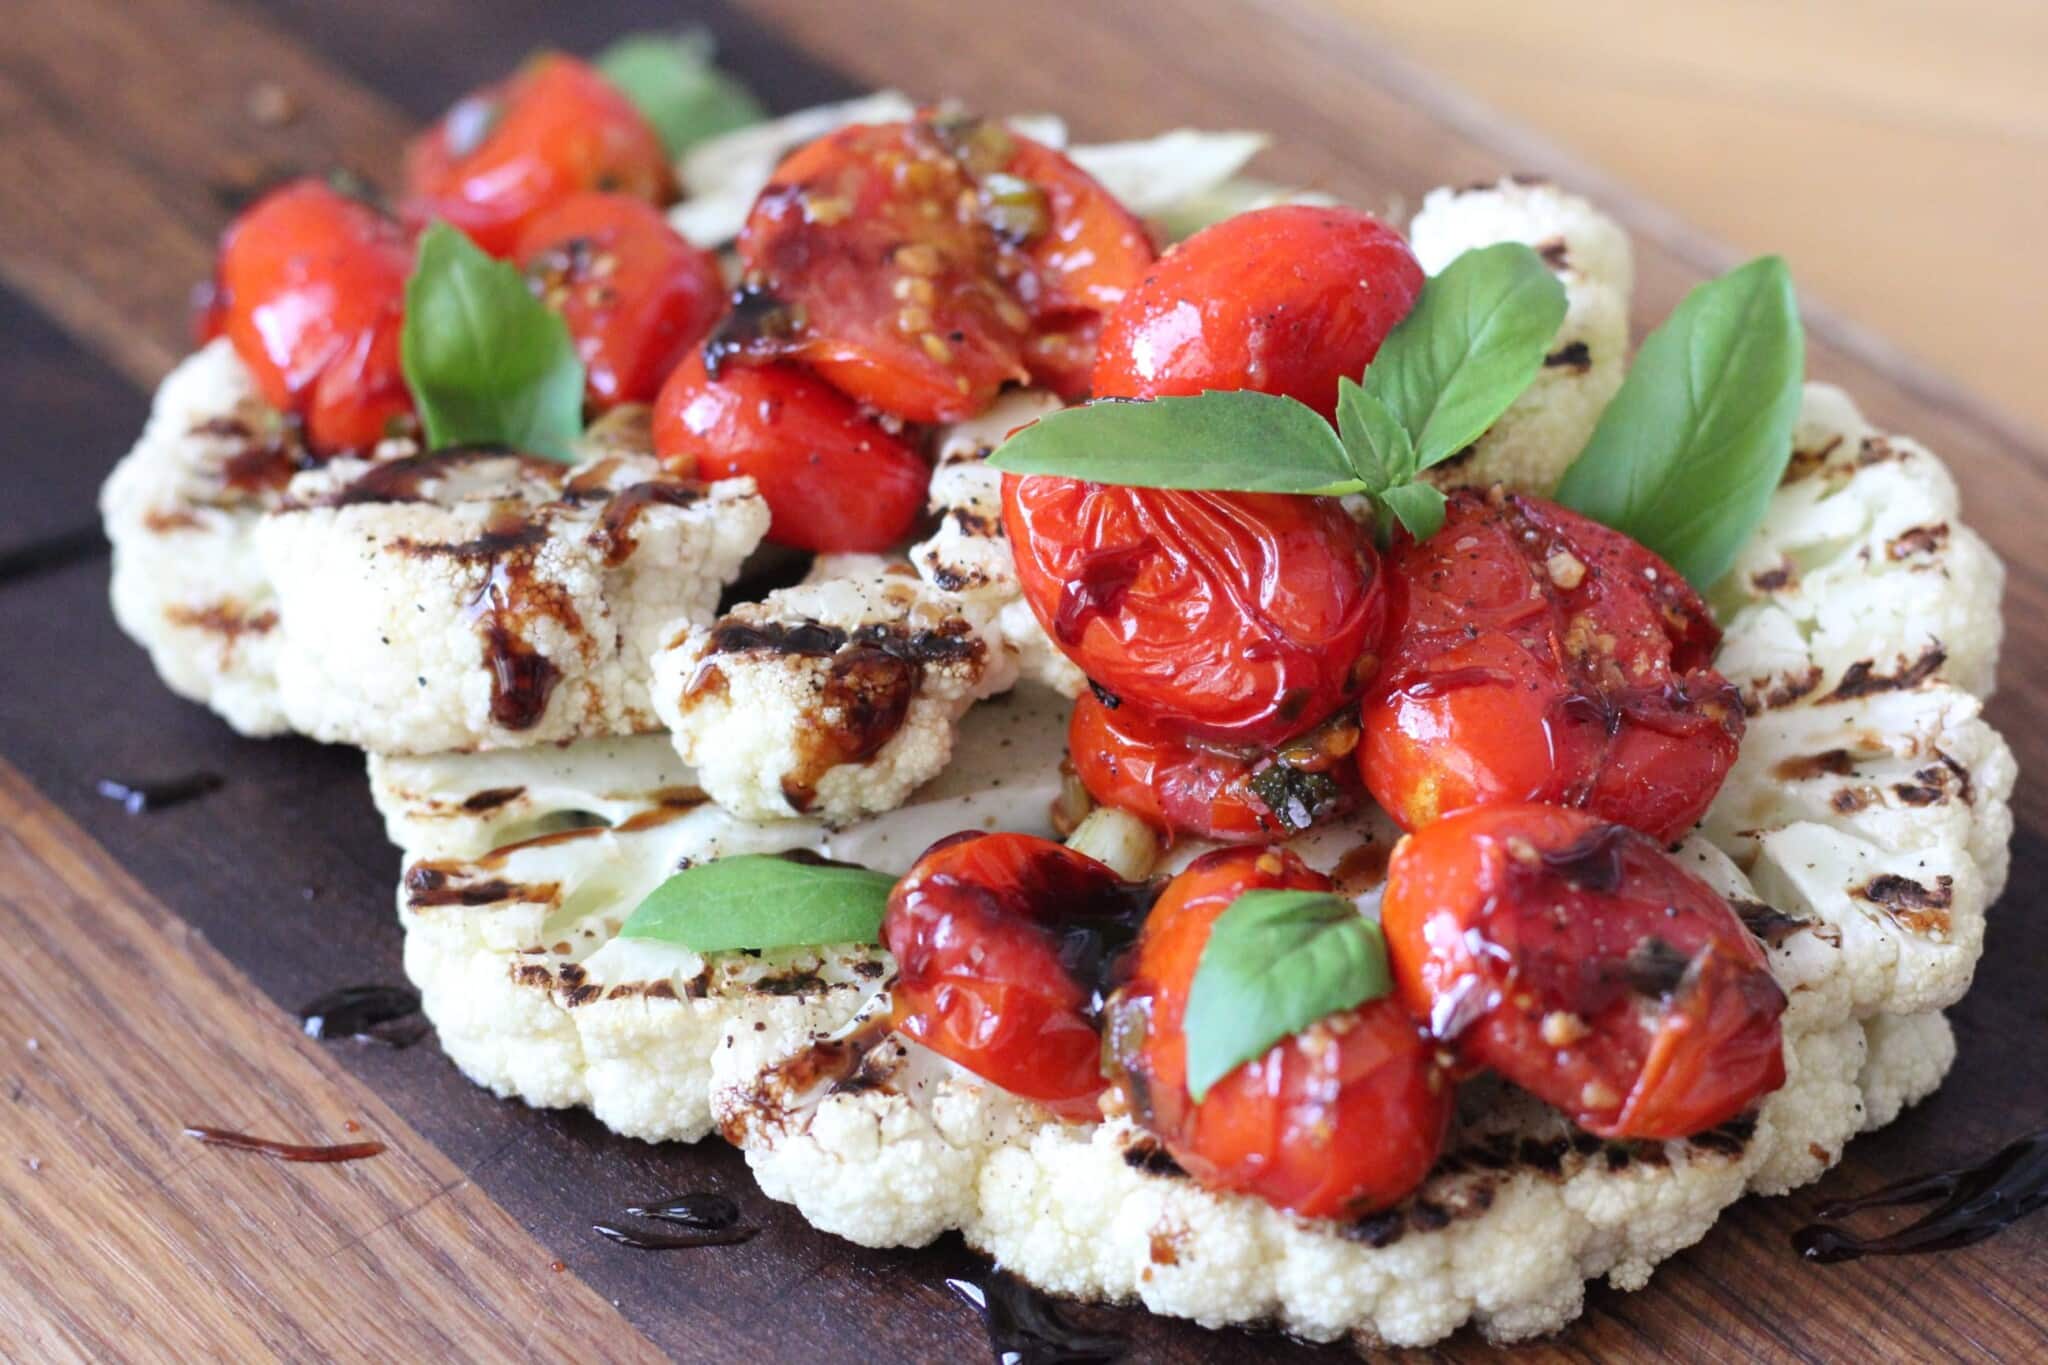 grilled cauliflower steaks with burst tomato salad on a wooden cutting board.